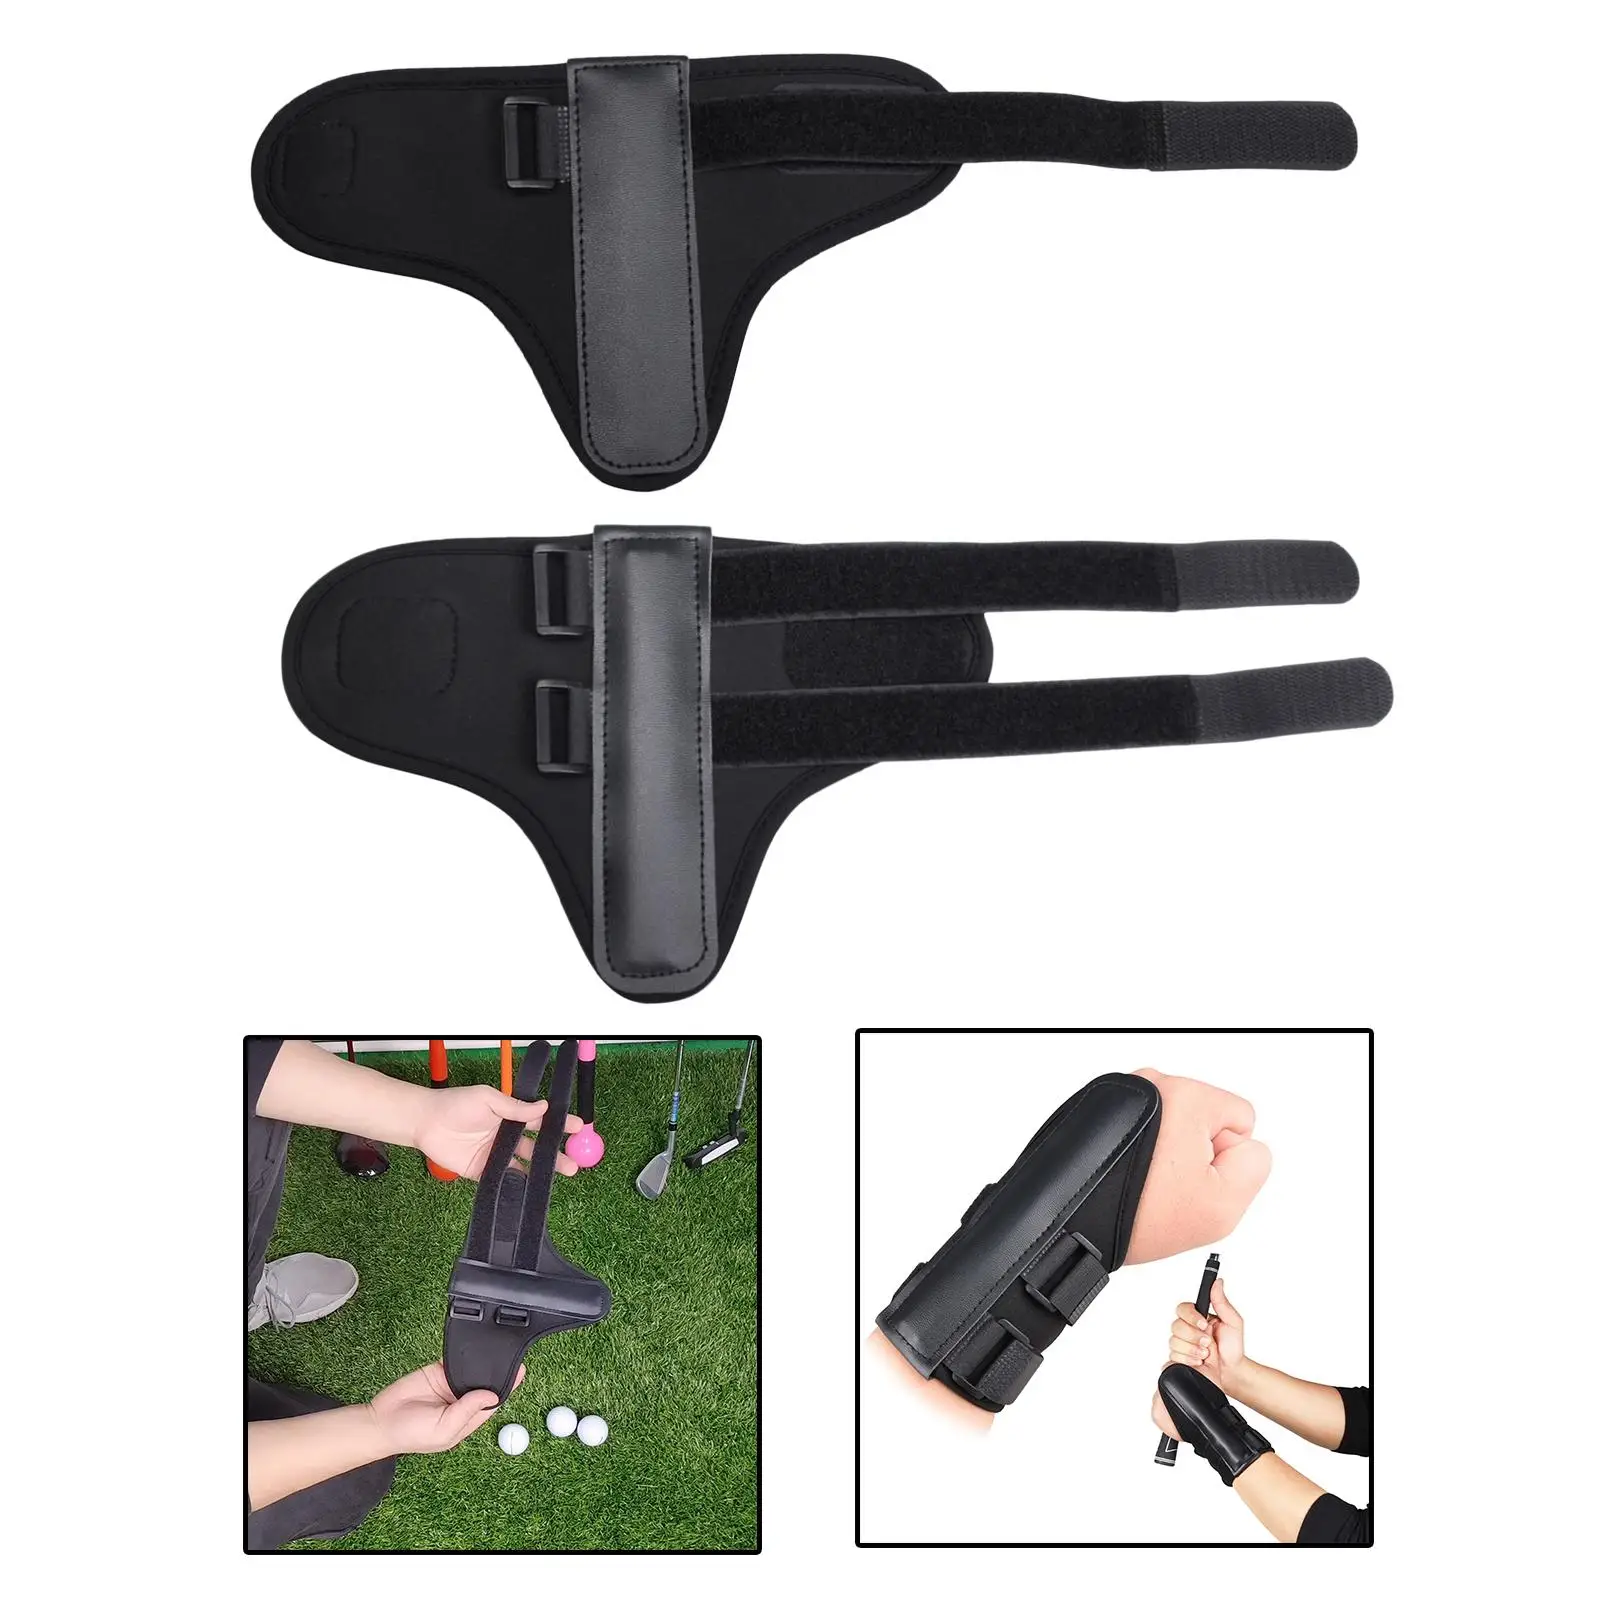 Professional Golf Swing Aid Brace Holder Trainer Tool for Golf Beginners